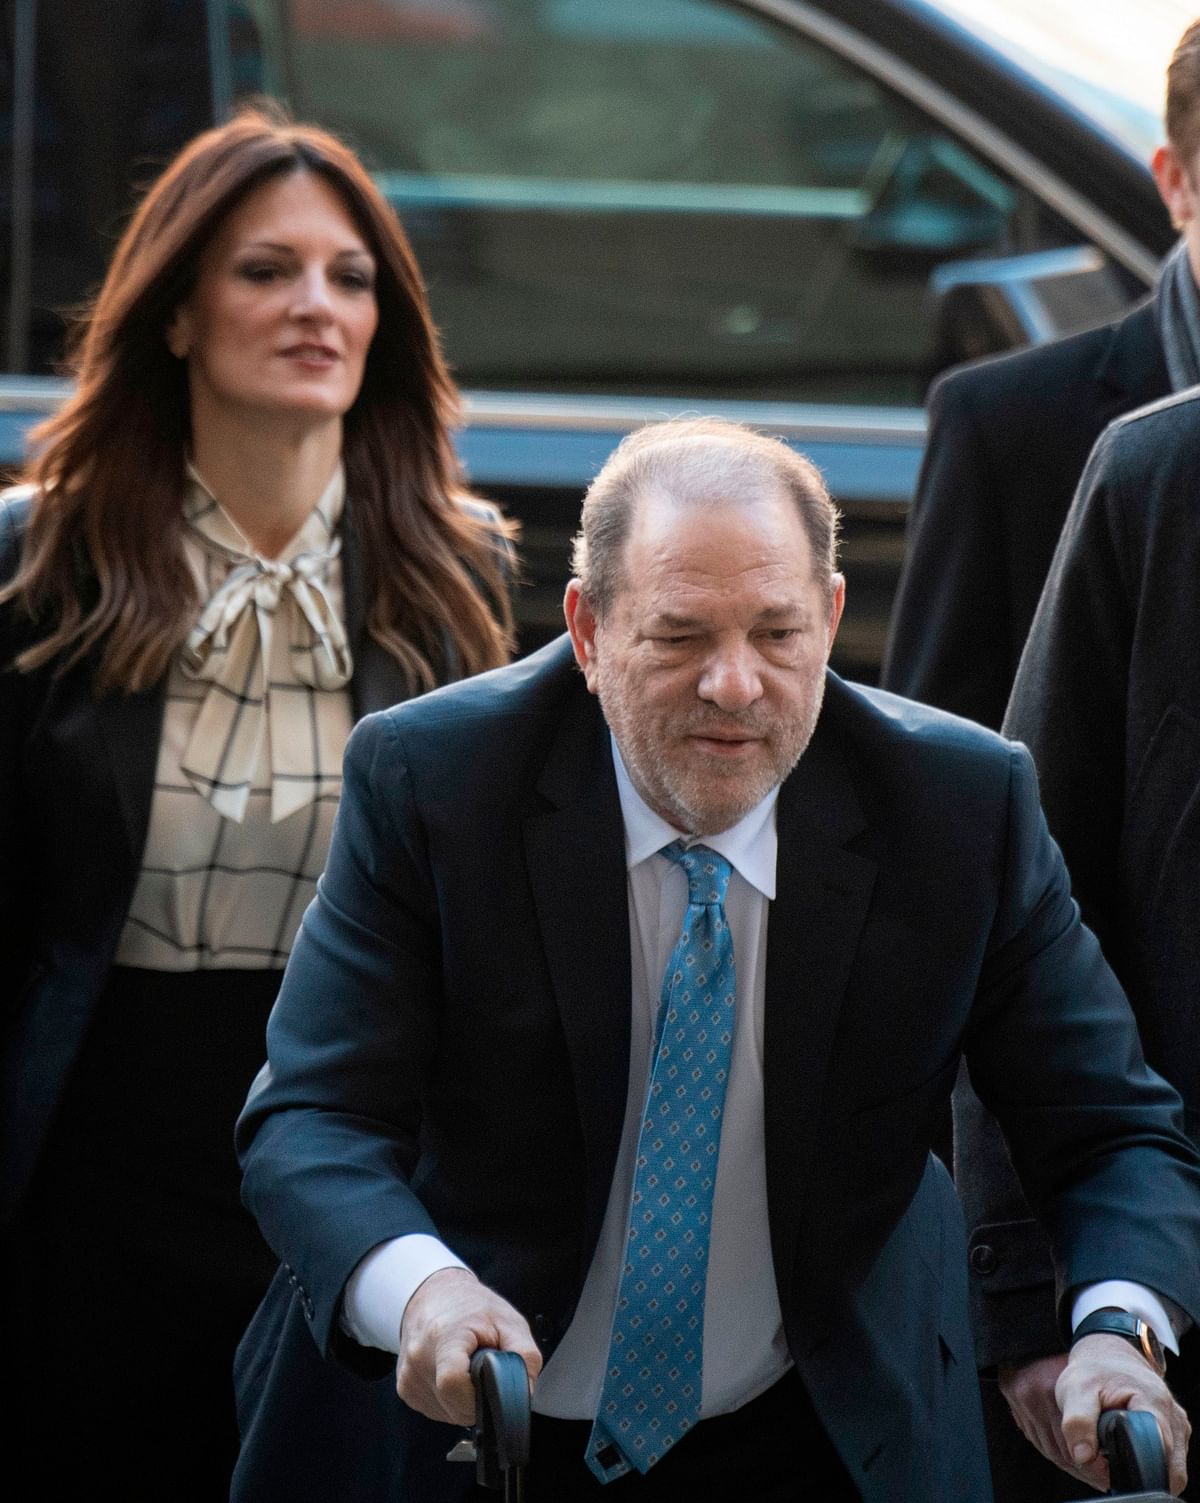 Harvey Weinstein arrives at the Manhattan Criminal Court, on 24 February in New York City. Photo: AFP